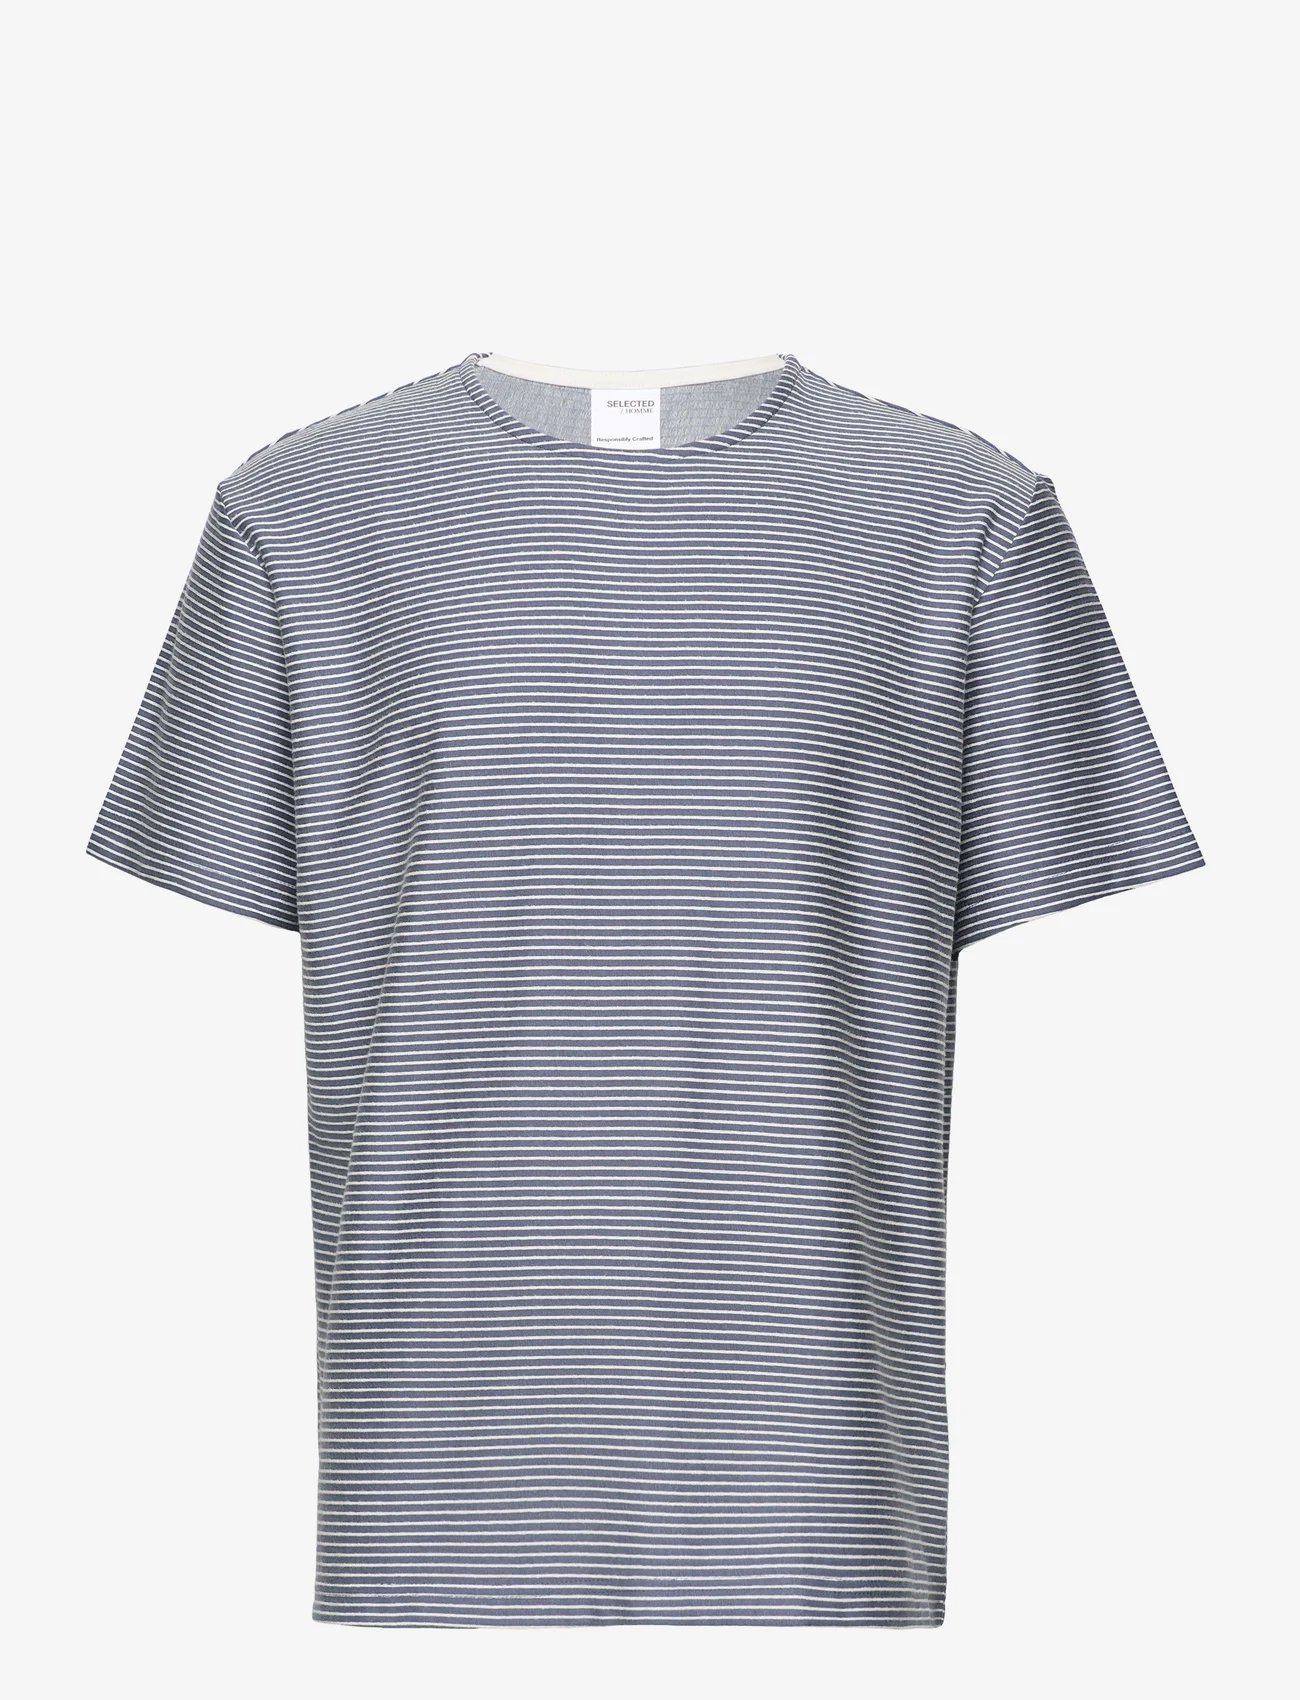 Selected Homme - SLHRELAXSOBB STRIPE SS O-NECK TEE W - bering sea - 0